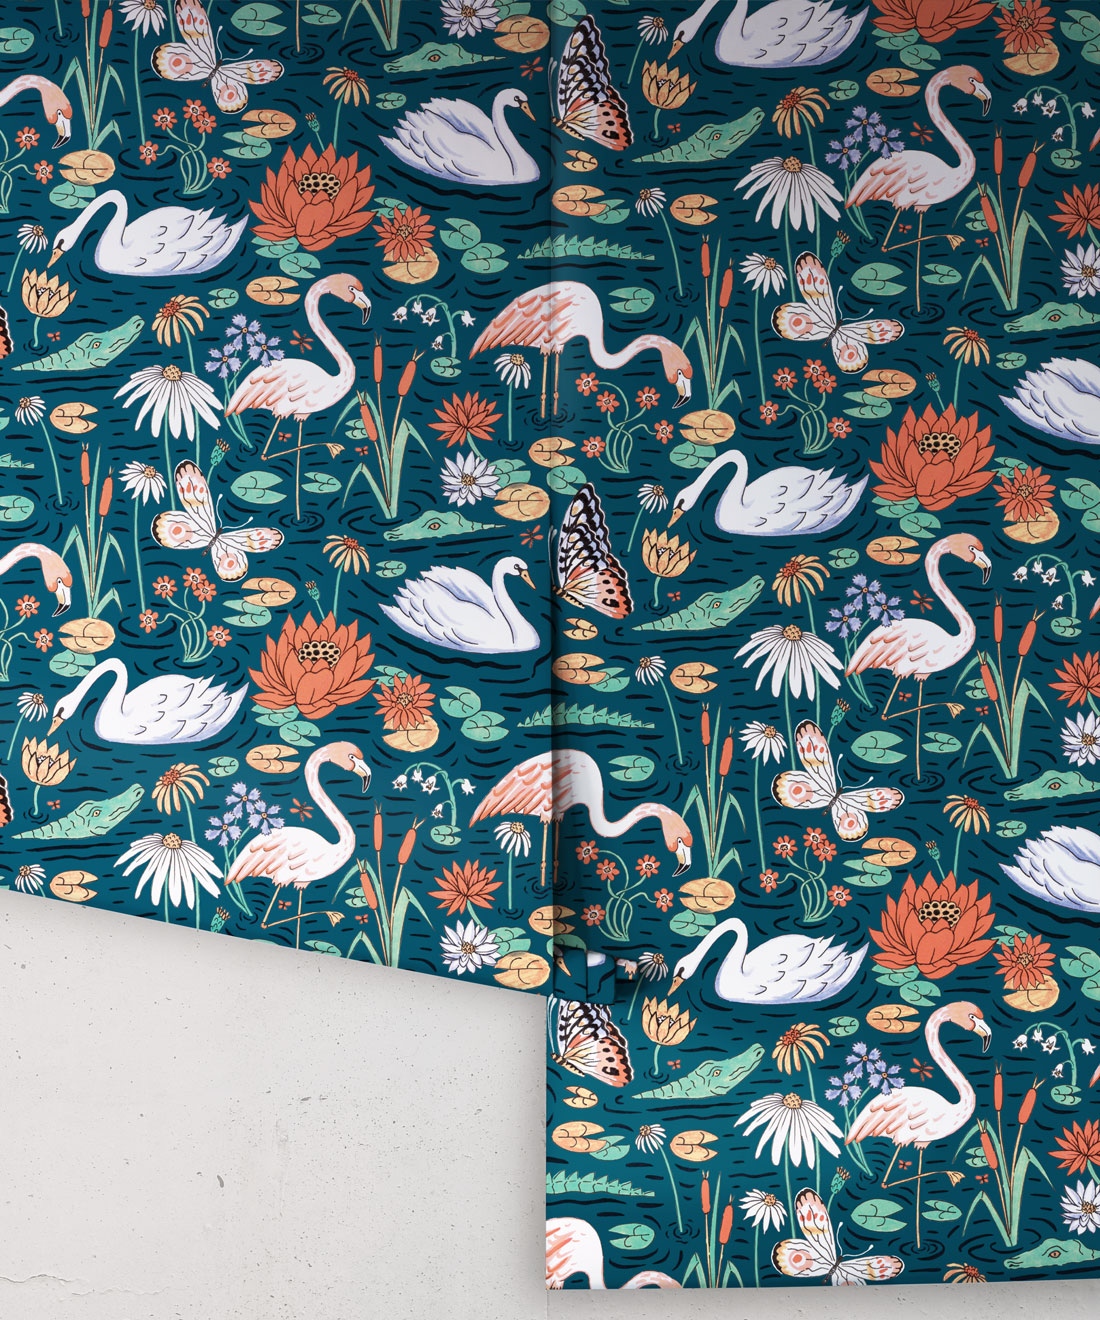 Pond Pattern Wallpaper featuring alligators, swans, flamingos and lily pads rolls